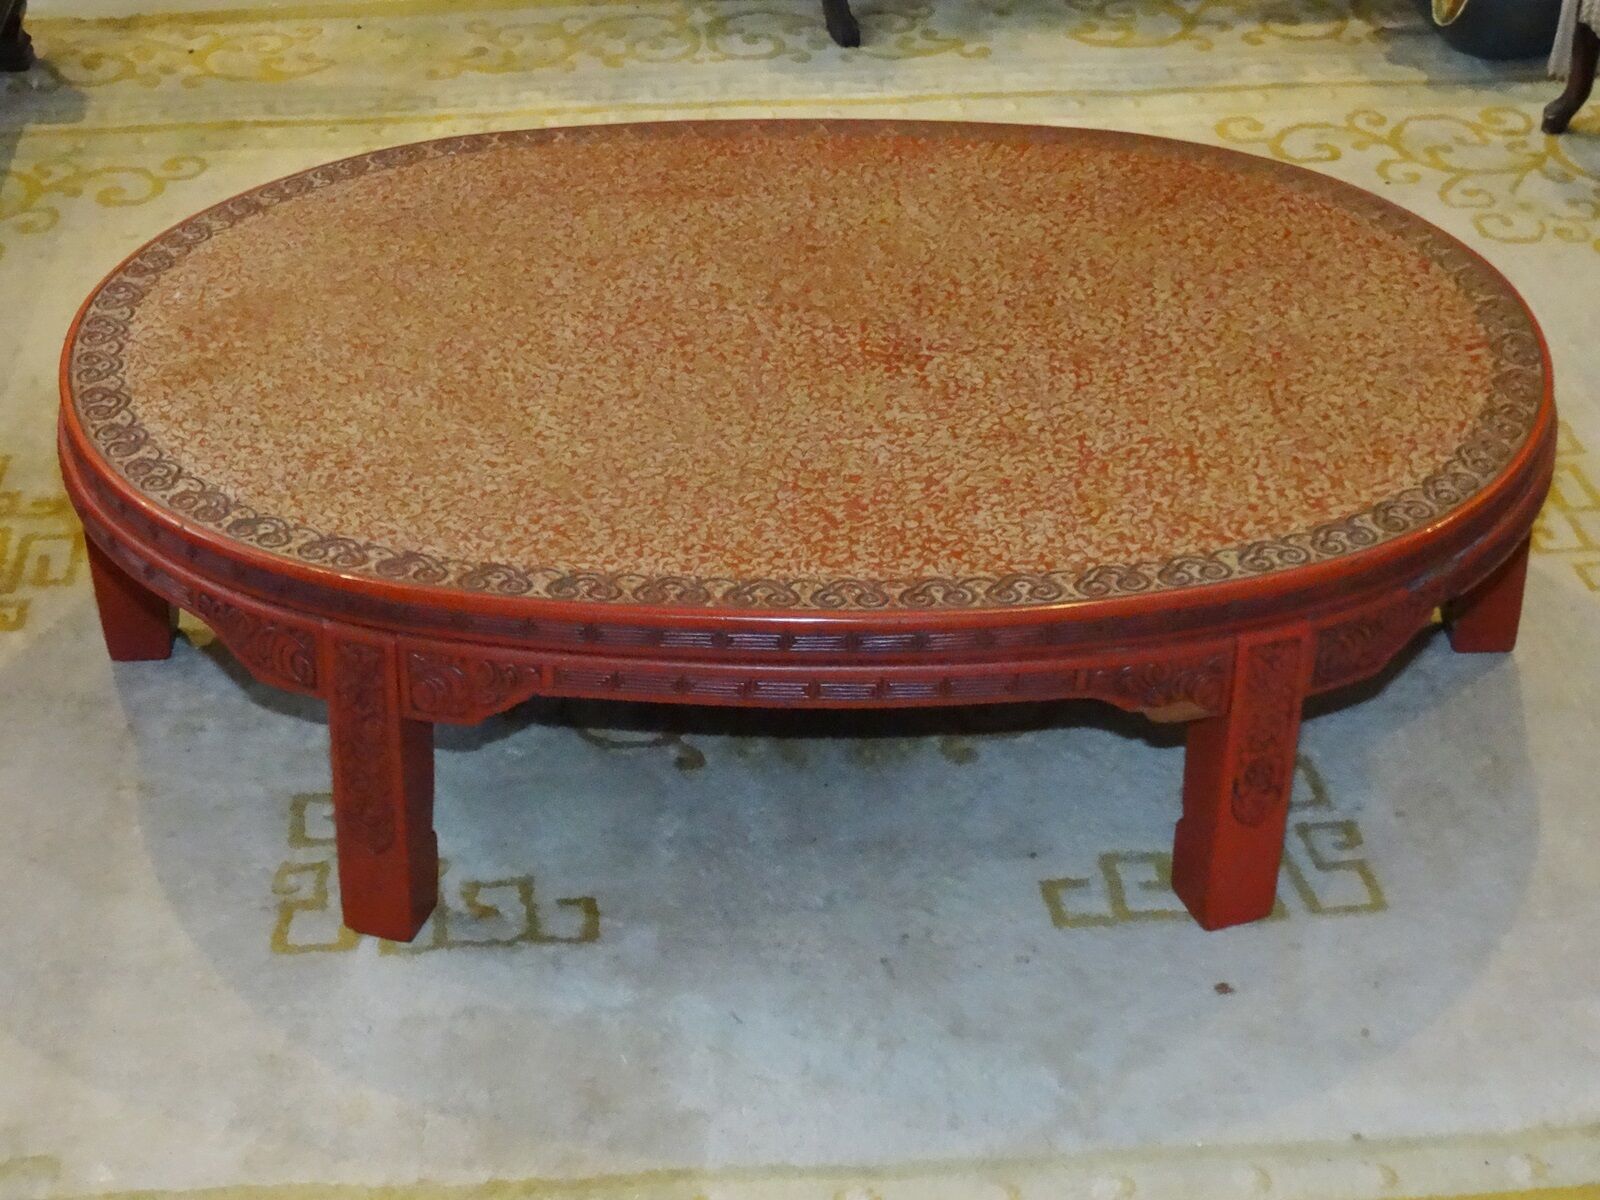 ANTIQUE LATE 19 c. CHINESE LACQUER INTRICATE CARVED CINNABAR COFFEE TABLE Без бренда - фотография #3